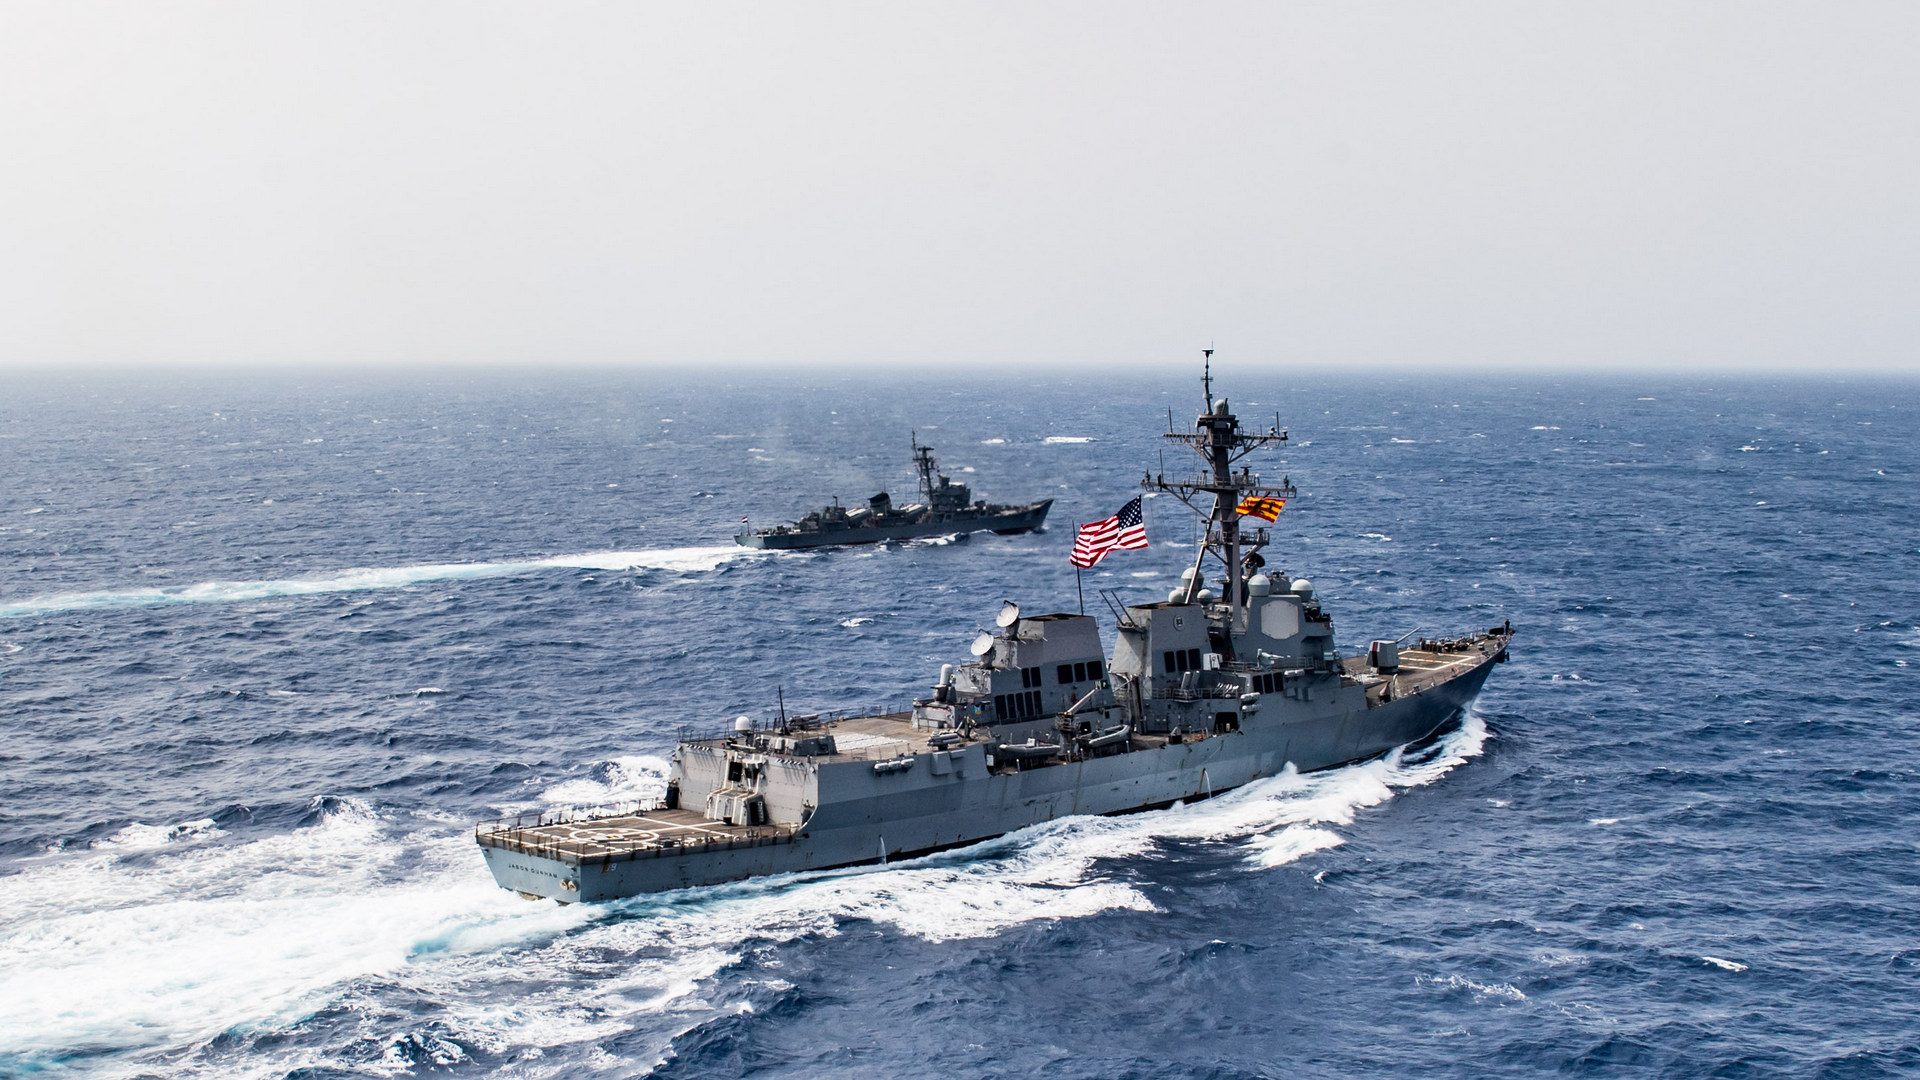 U.S. 5th Fleet Area of Operations : (July 1, 2018) The guided-missile destroyer USS Jason Dunham (DDG 109), bottom-right, conducts a passing exercise with the Egyptian navy frigate El Zafer (F951). Jason Dunham is deployed to the U.S. 5th Fleet area of operations in support of naval operations to ensure maritime stability and security in the Central region, connecting the Mediterranean and the Pacific through the western Indian Ocean and three strategic choke points -- U.S. Navy photo by Mass Communication Specialist 3rd Class Jonathan Clay. -